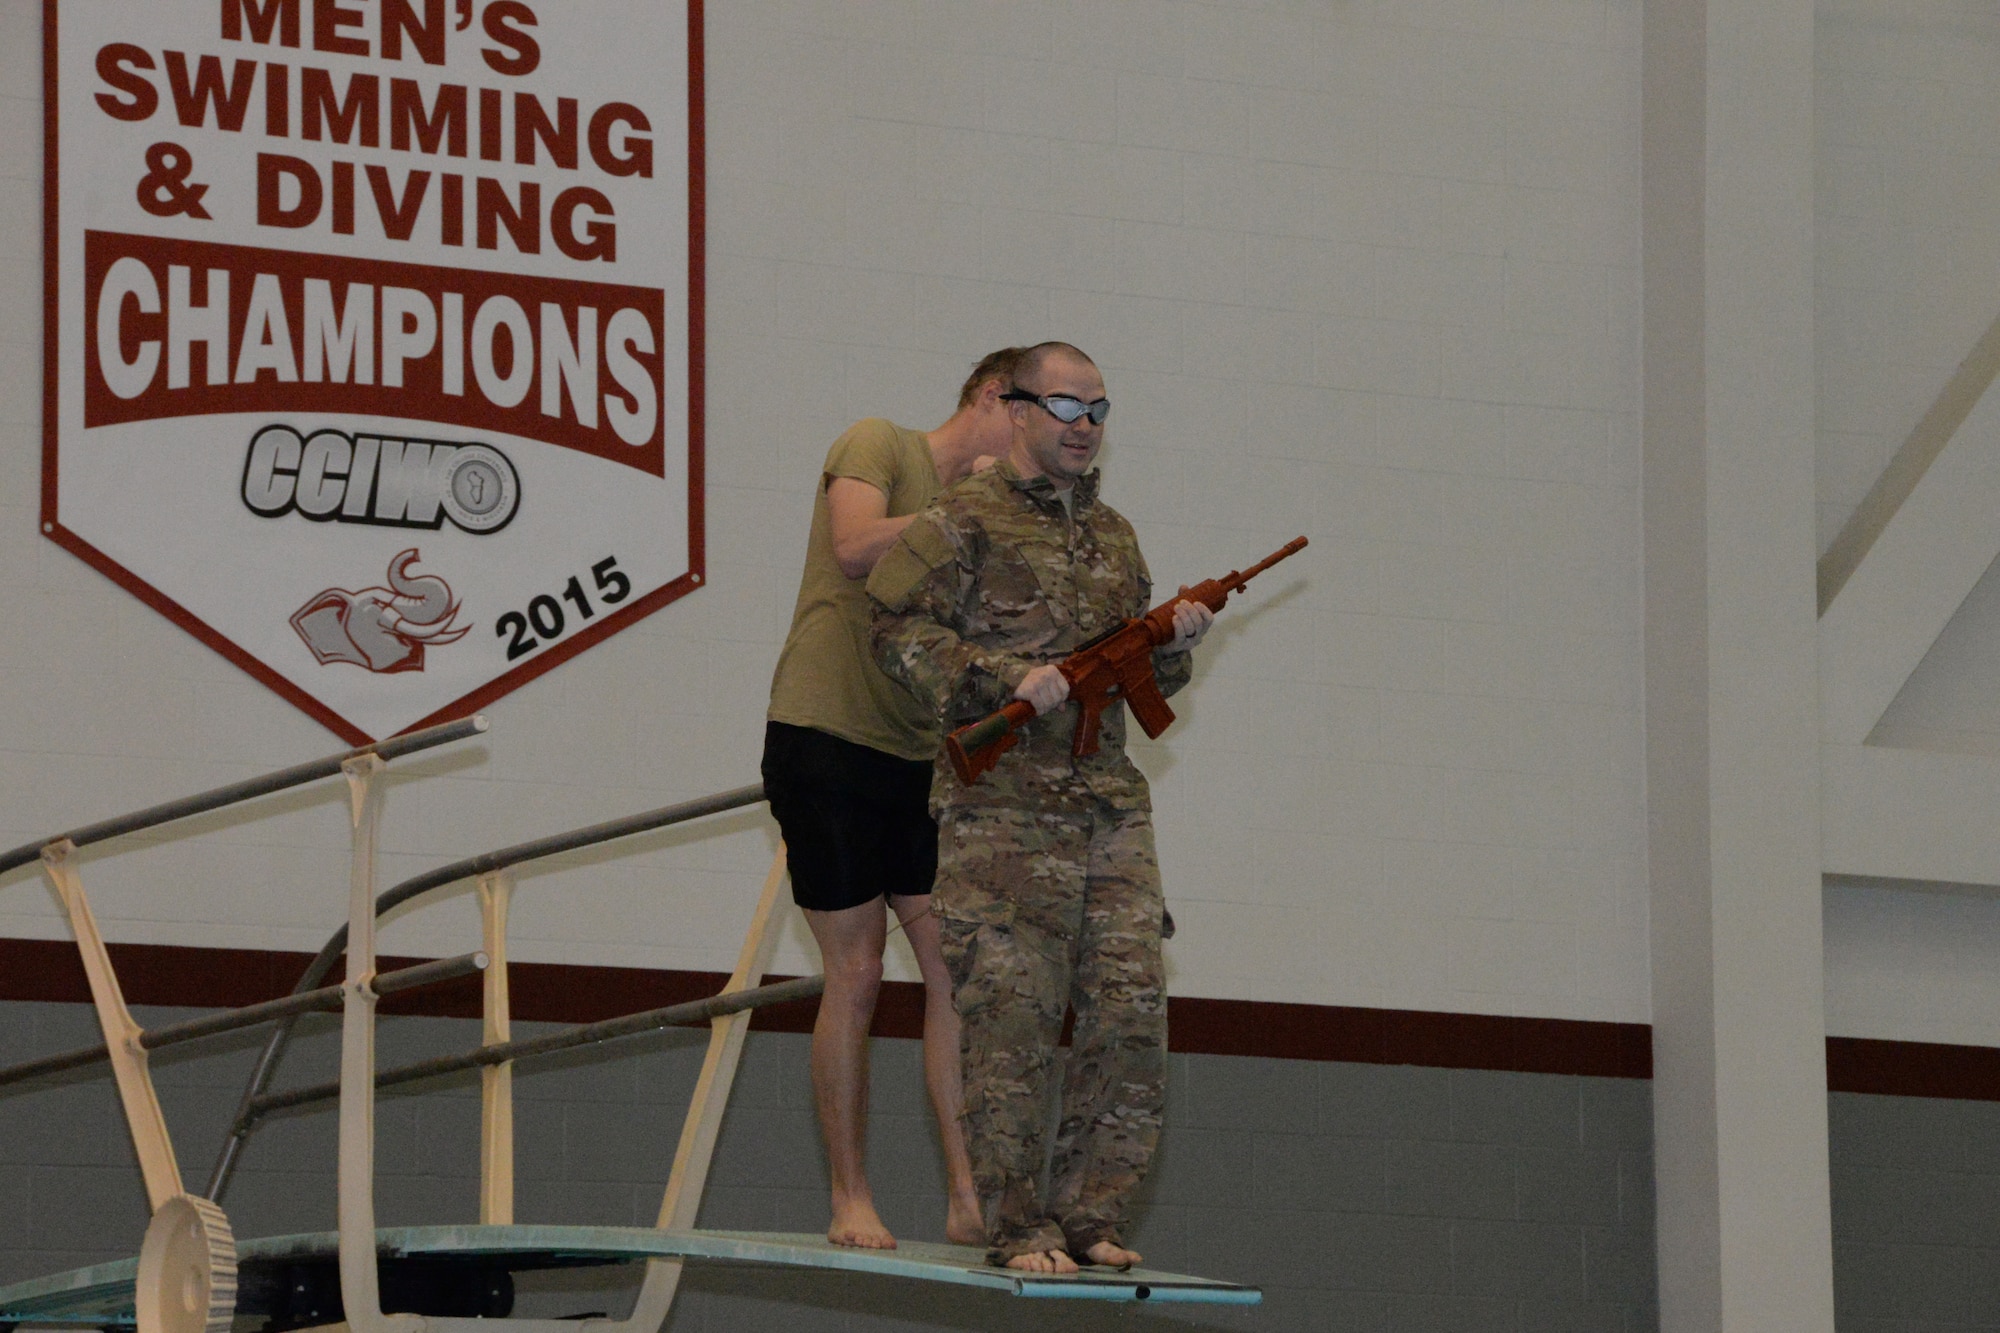 U.S. Air Force Airmen assigned to the Indiana Air National Guard, 181st Intelligence Wing, 113th Air Support Operation Squadron prepares to be pushed off of a high diving board while blind-folded to simulate an unexpected water entry during a night combat patrol at the Sports and Recreation Center on the campus of Rose-Hulman Institute of Technology in Terre Haute Feb. 6, 2016. The Airman trained on four different areas that tested different swimming methods in a combat situation. (U.S. Air National Guard photo by Senior Airman Lonnie Wiram)